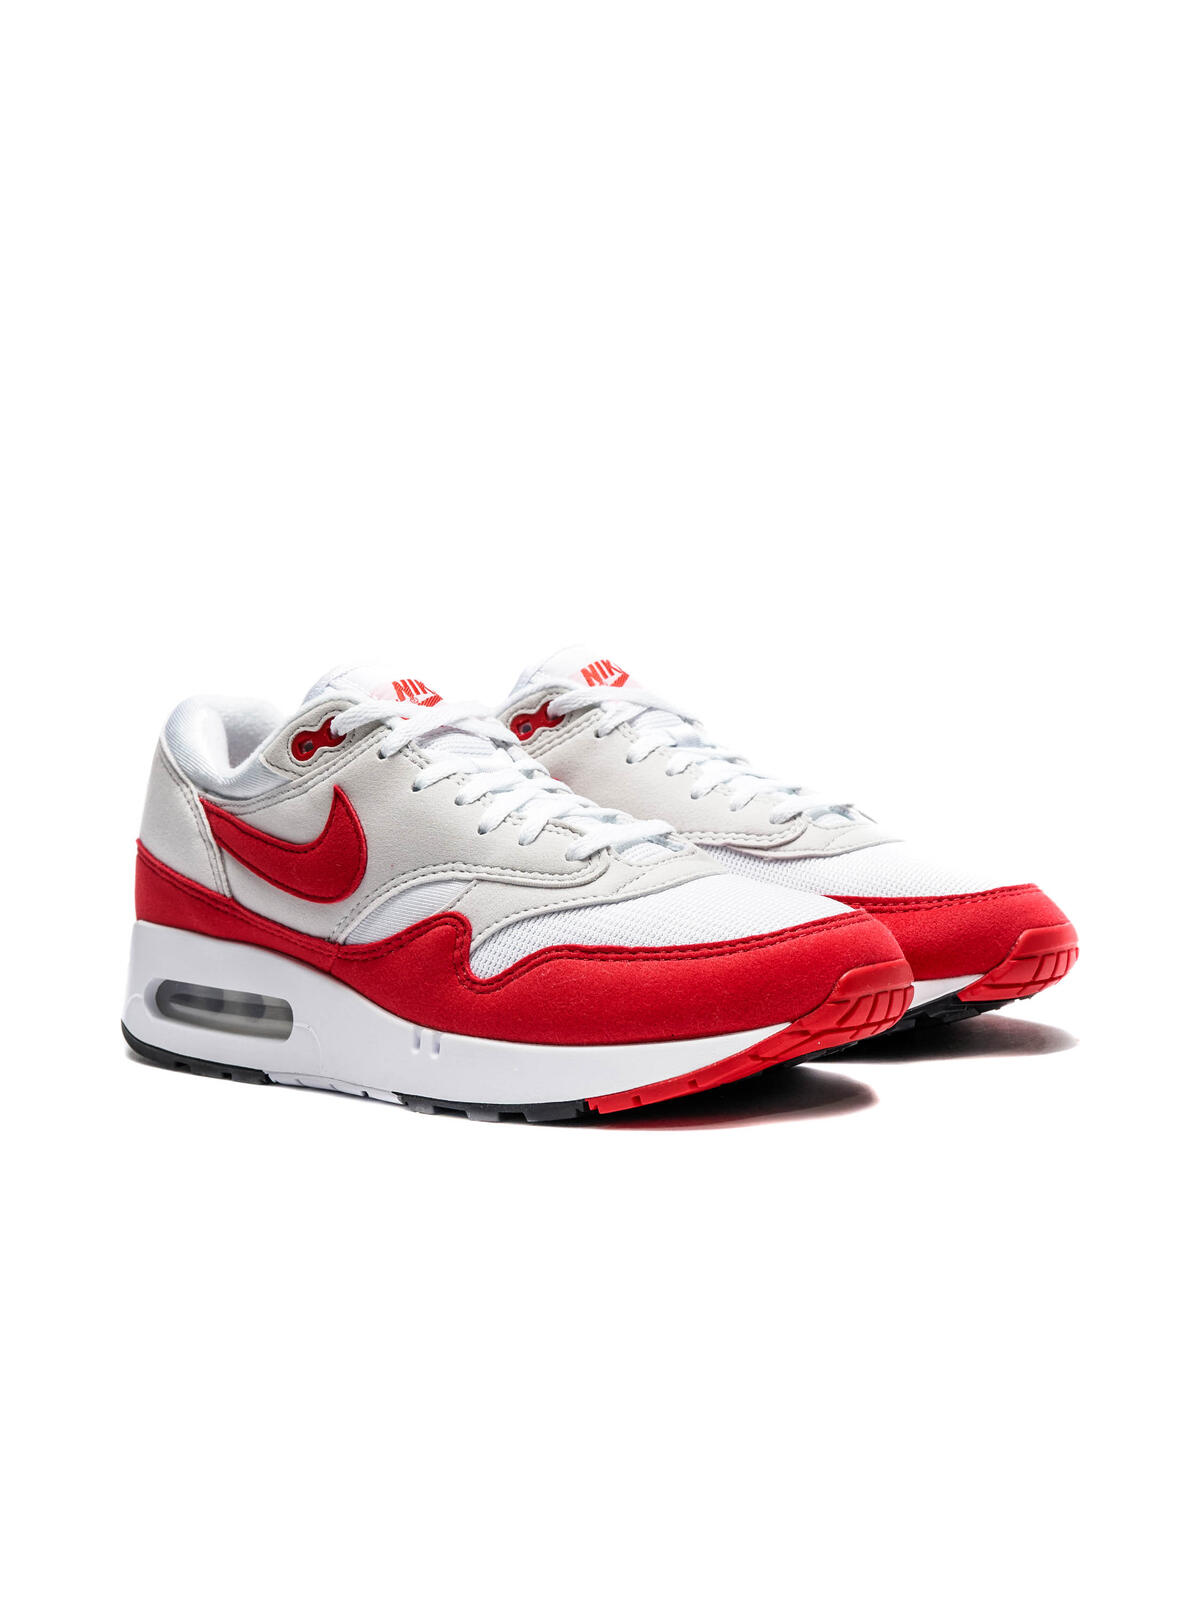 Nike Air Max 1 '86 Big Bubble Sport Red DQ3989-100 Size 9.5 SHIP NOW